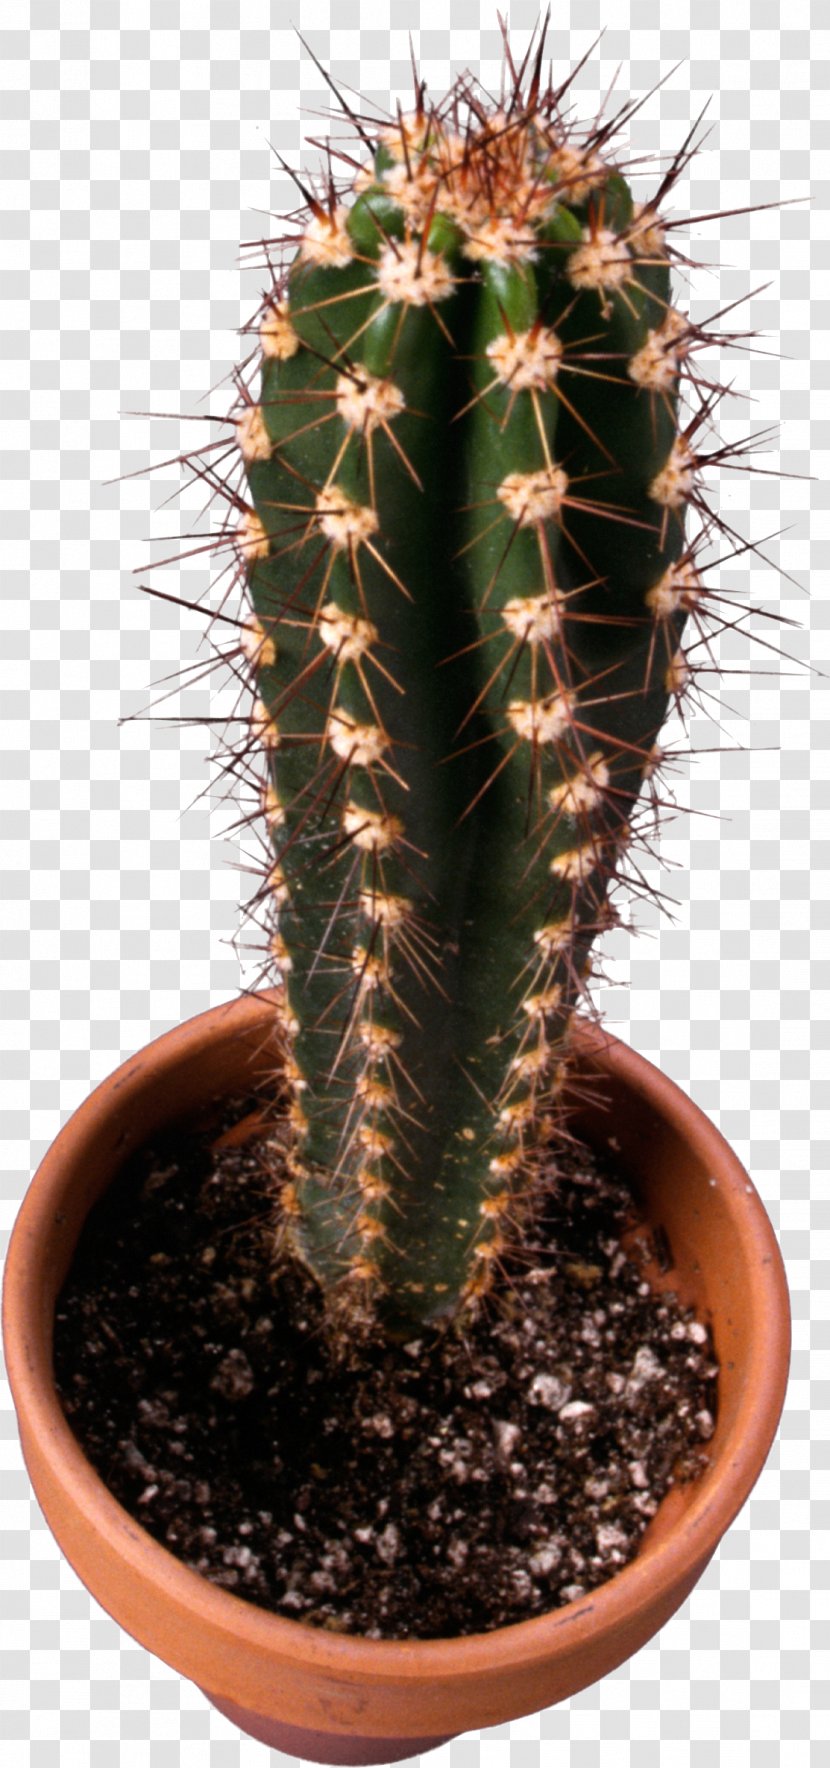 Cactaceae Mexican Cuisine Cactus Taqueria, Albany, CA Thorns, Spines, And Prickles Succulent Plant - Houseplant - Image Transparent PNG